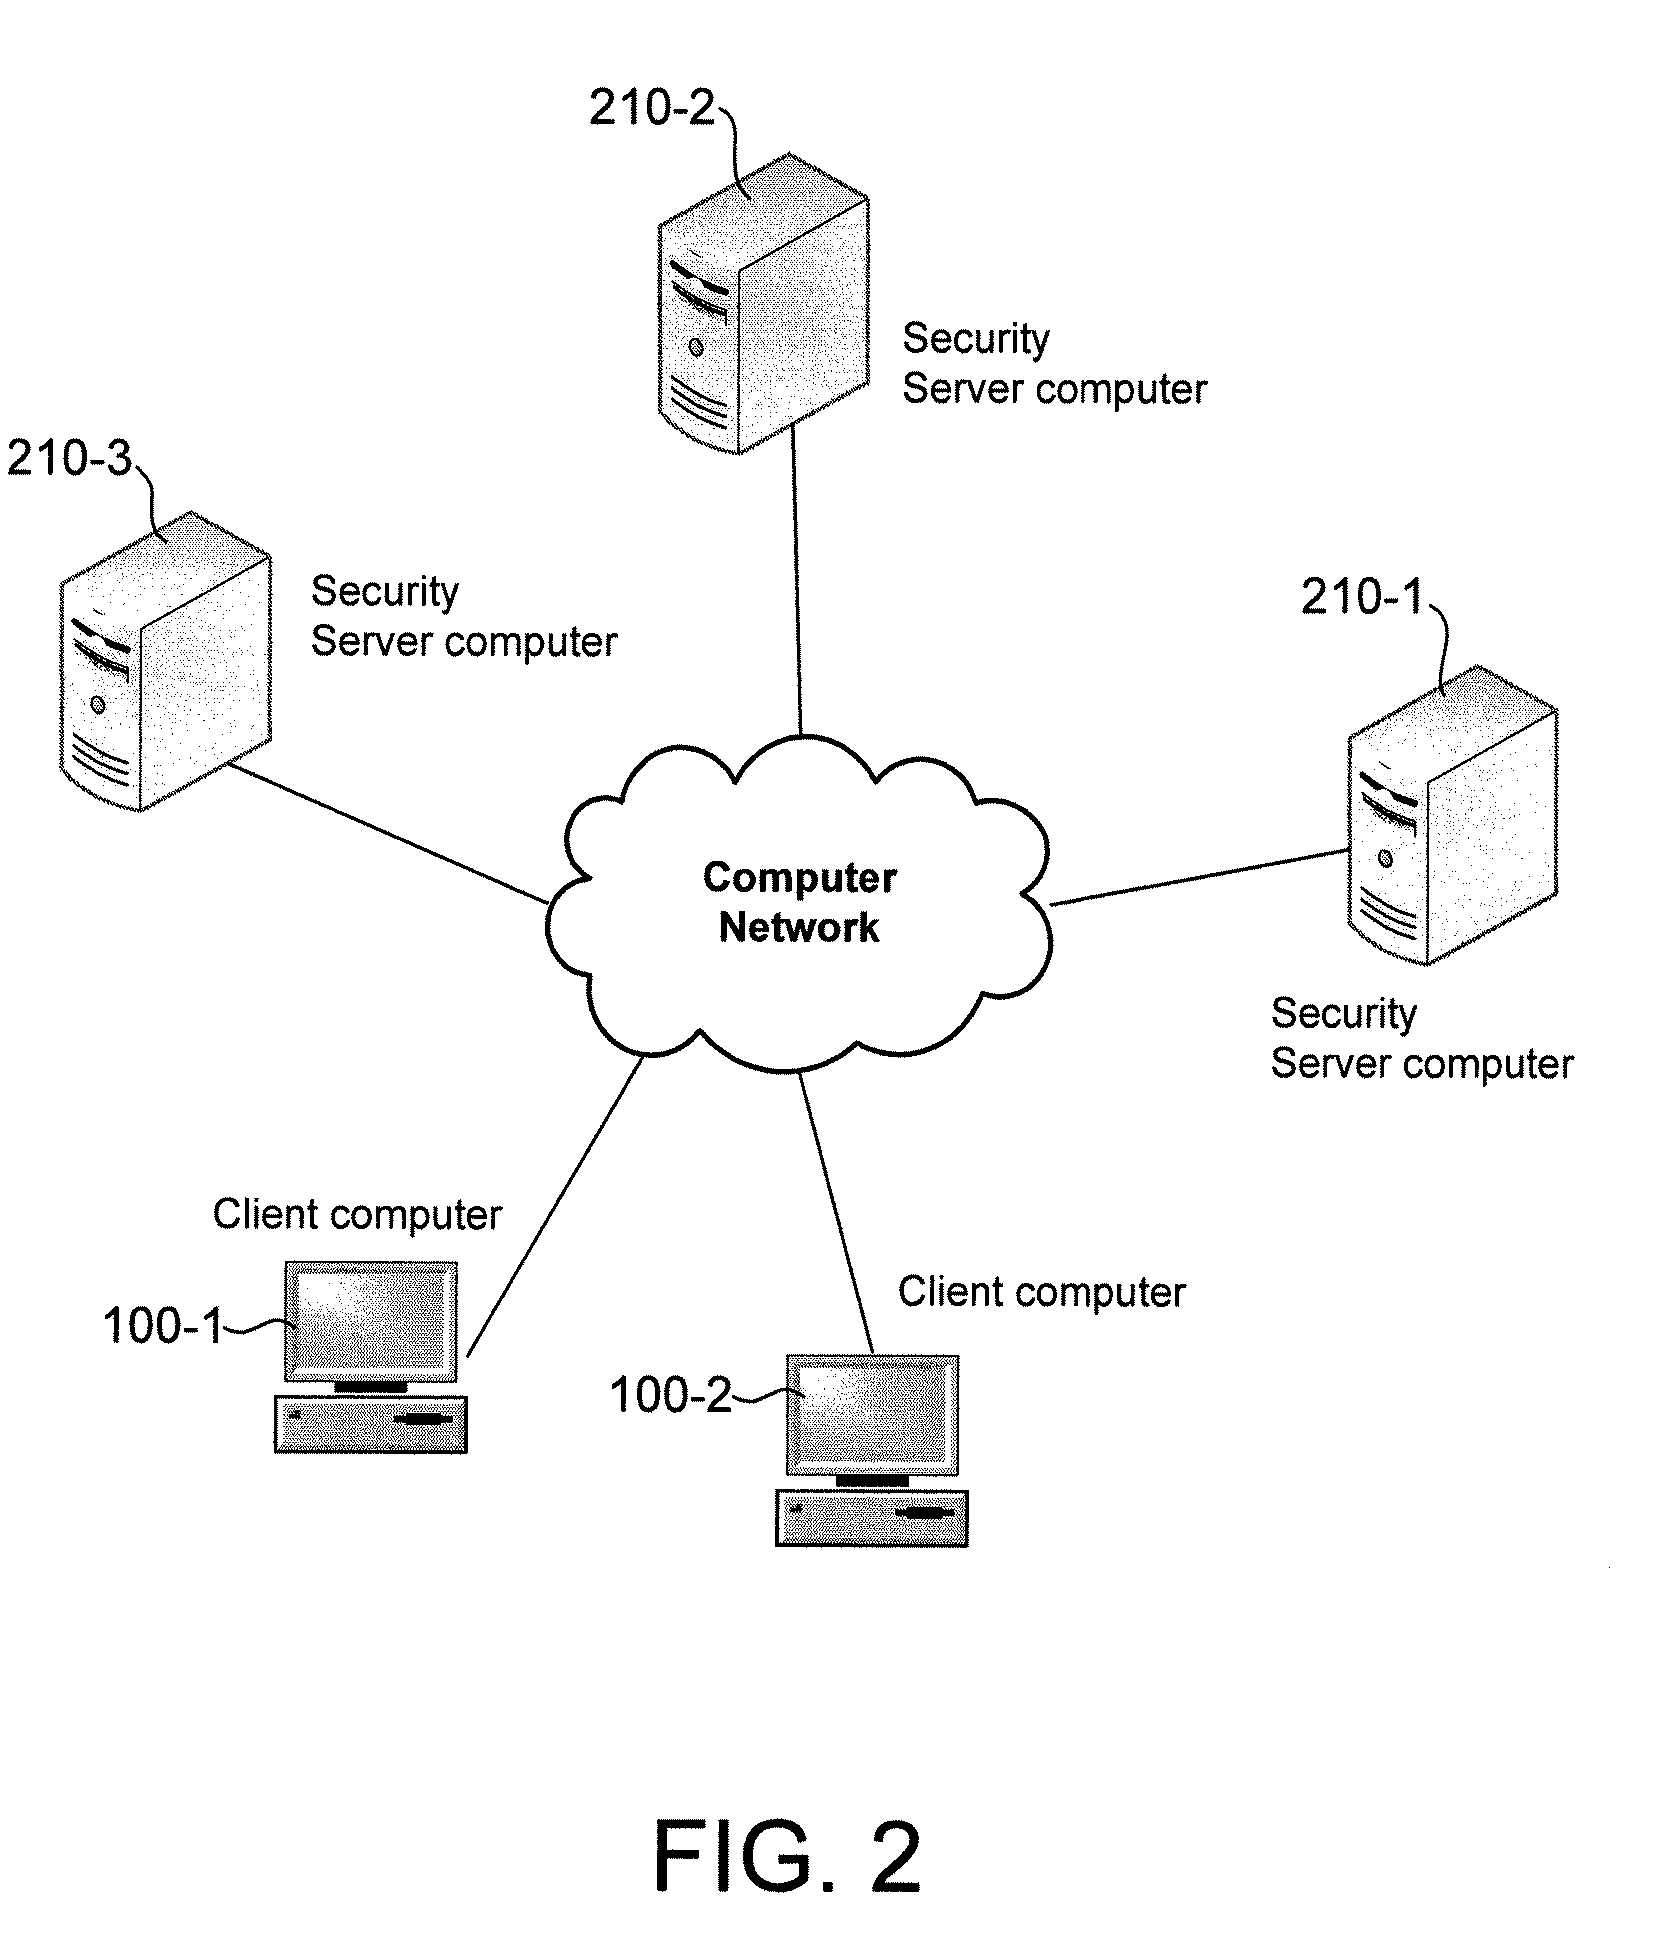 Selection of remotely located servers for computer security operations